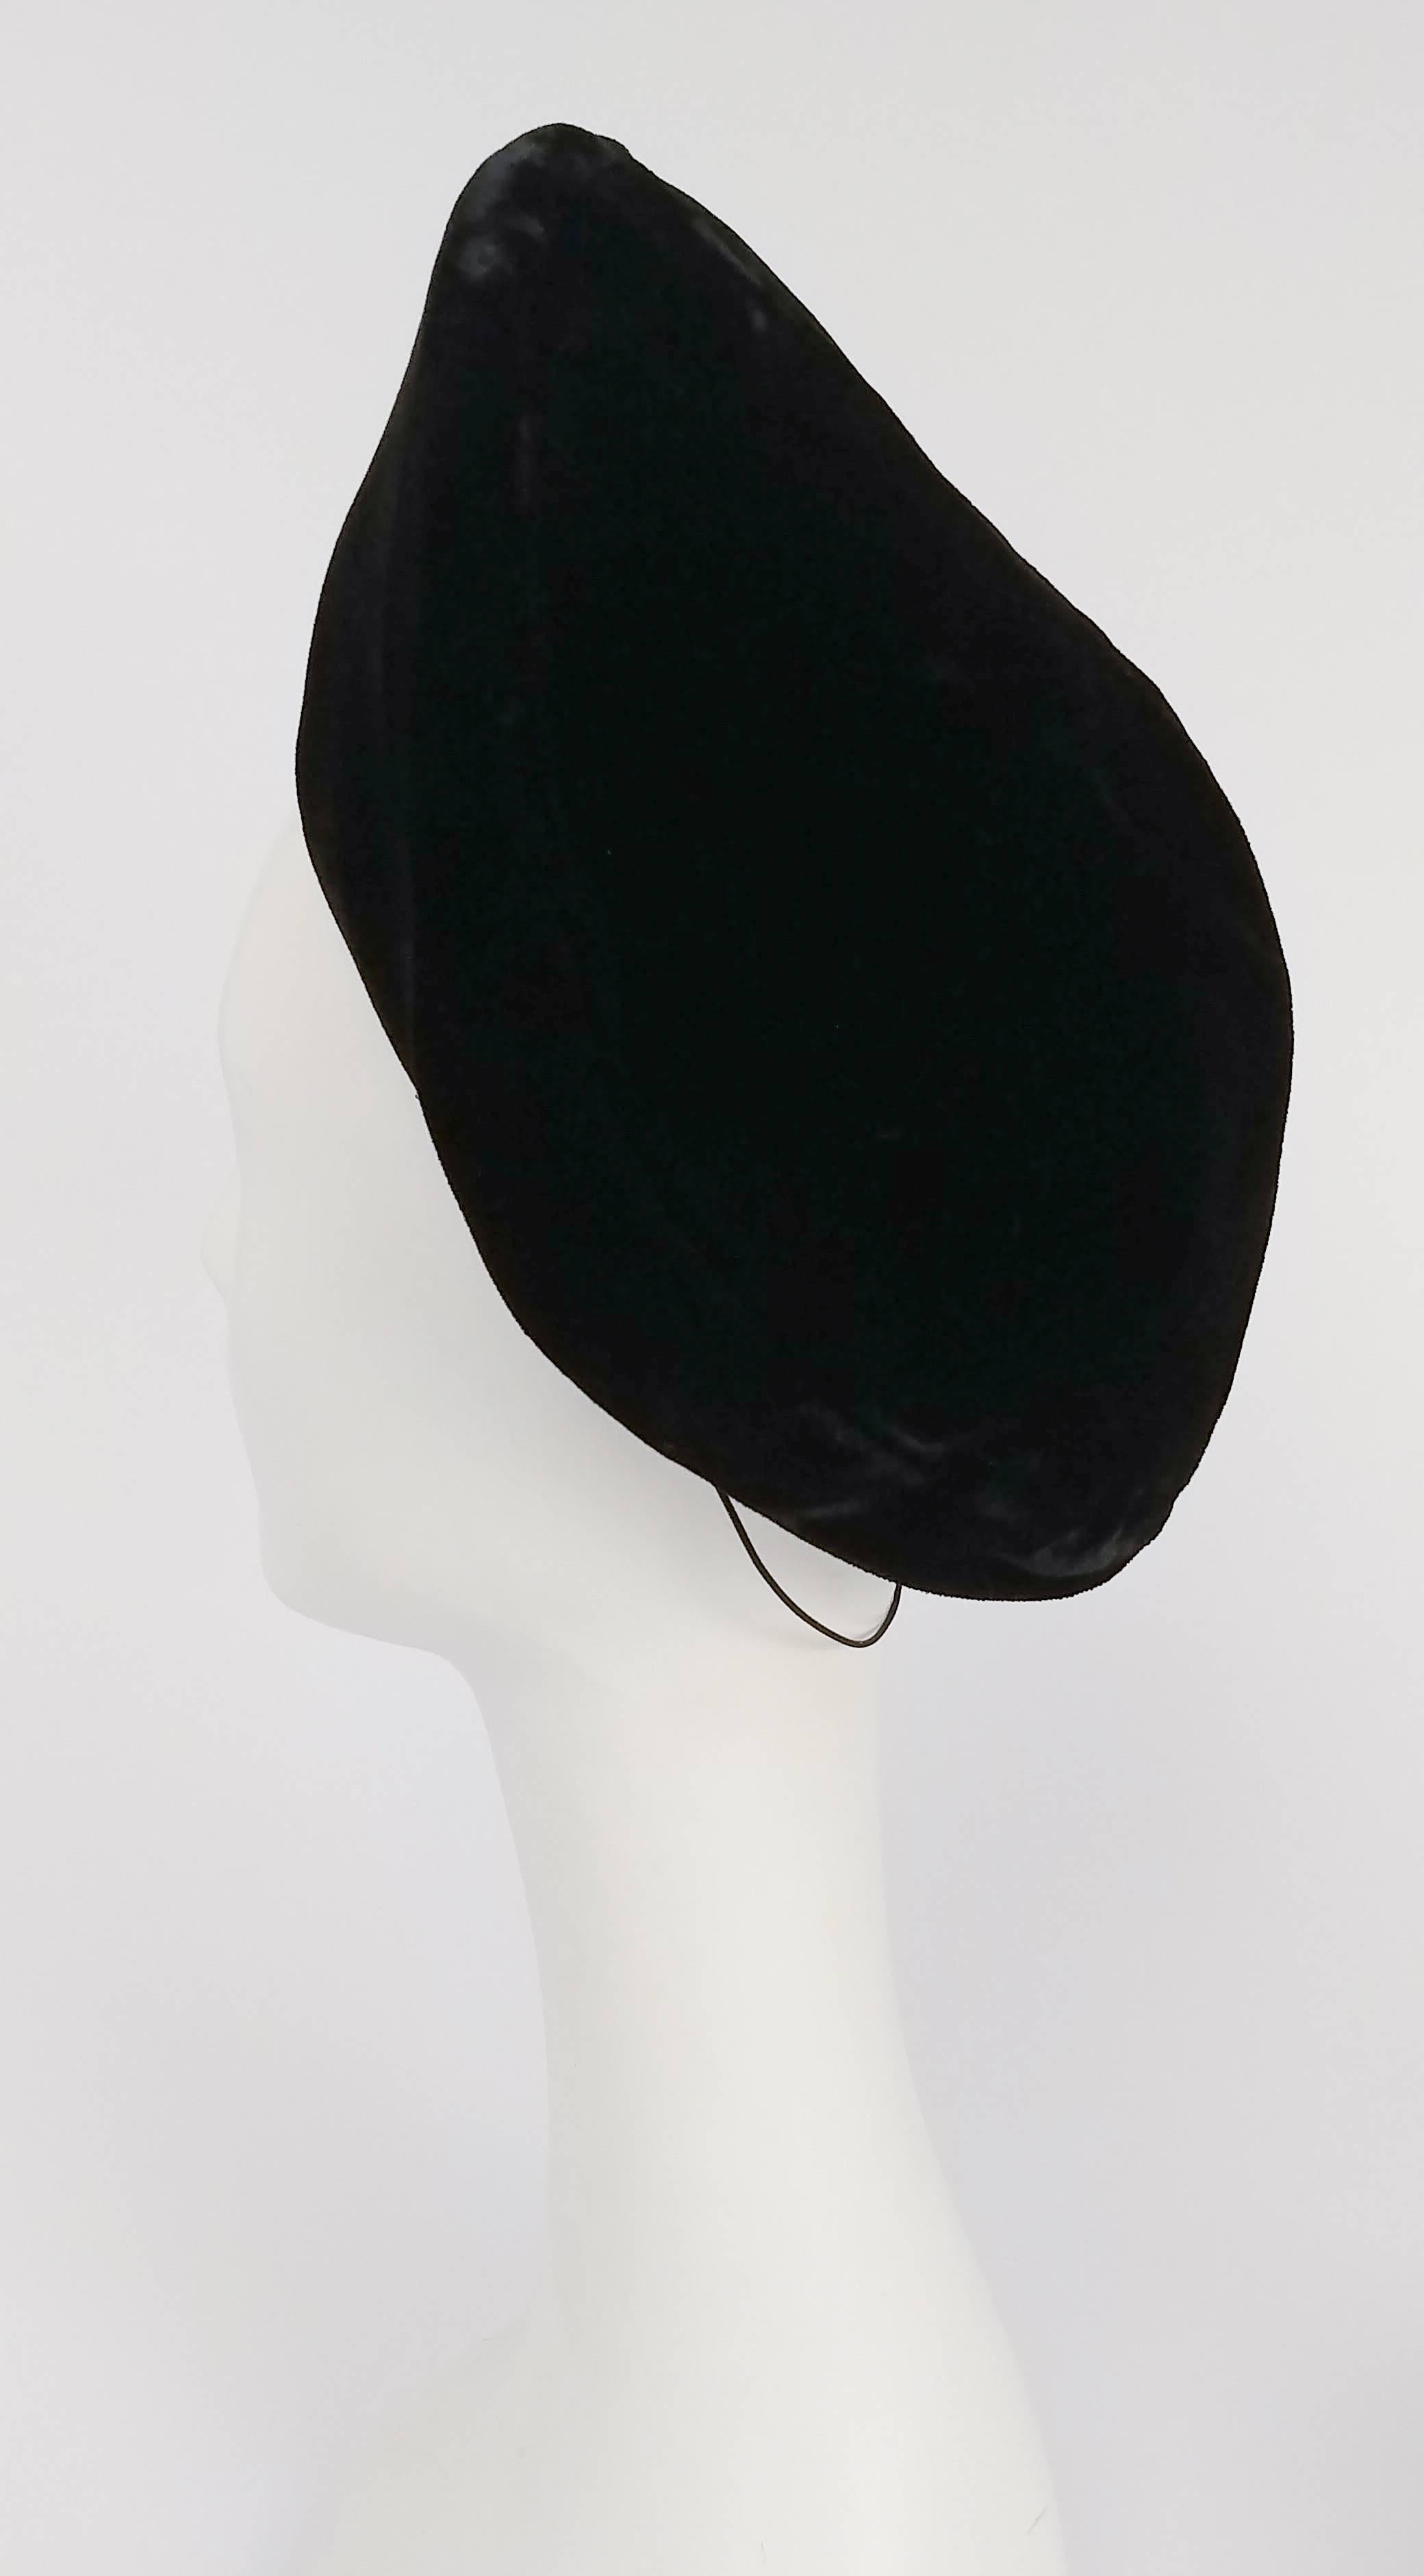 1940s Velvet Beret w/ Rhinestone Arrows. Large beret worn on back of head, elastic band holds hat to head. Slight pressing on velvet only visible in certain light, as shown in photo.